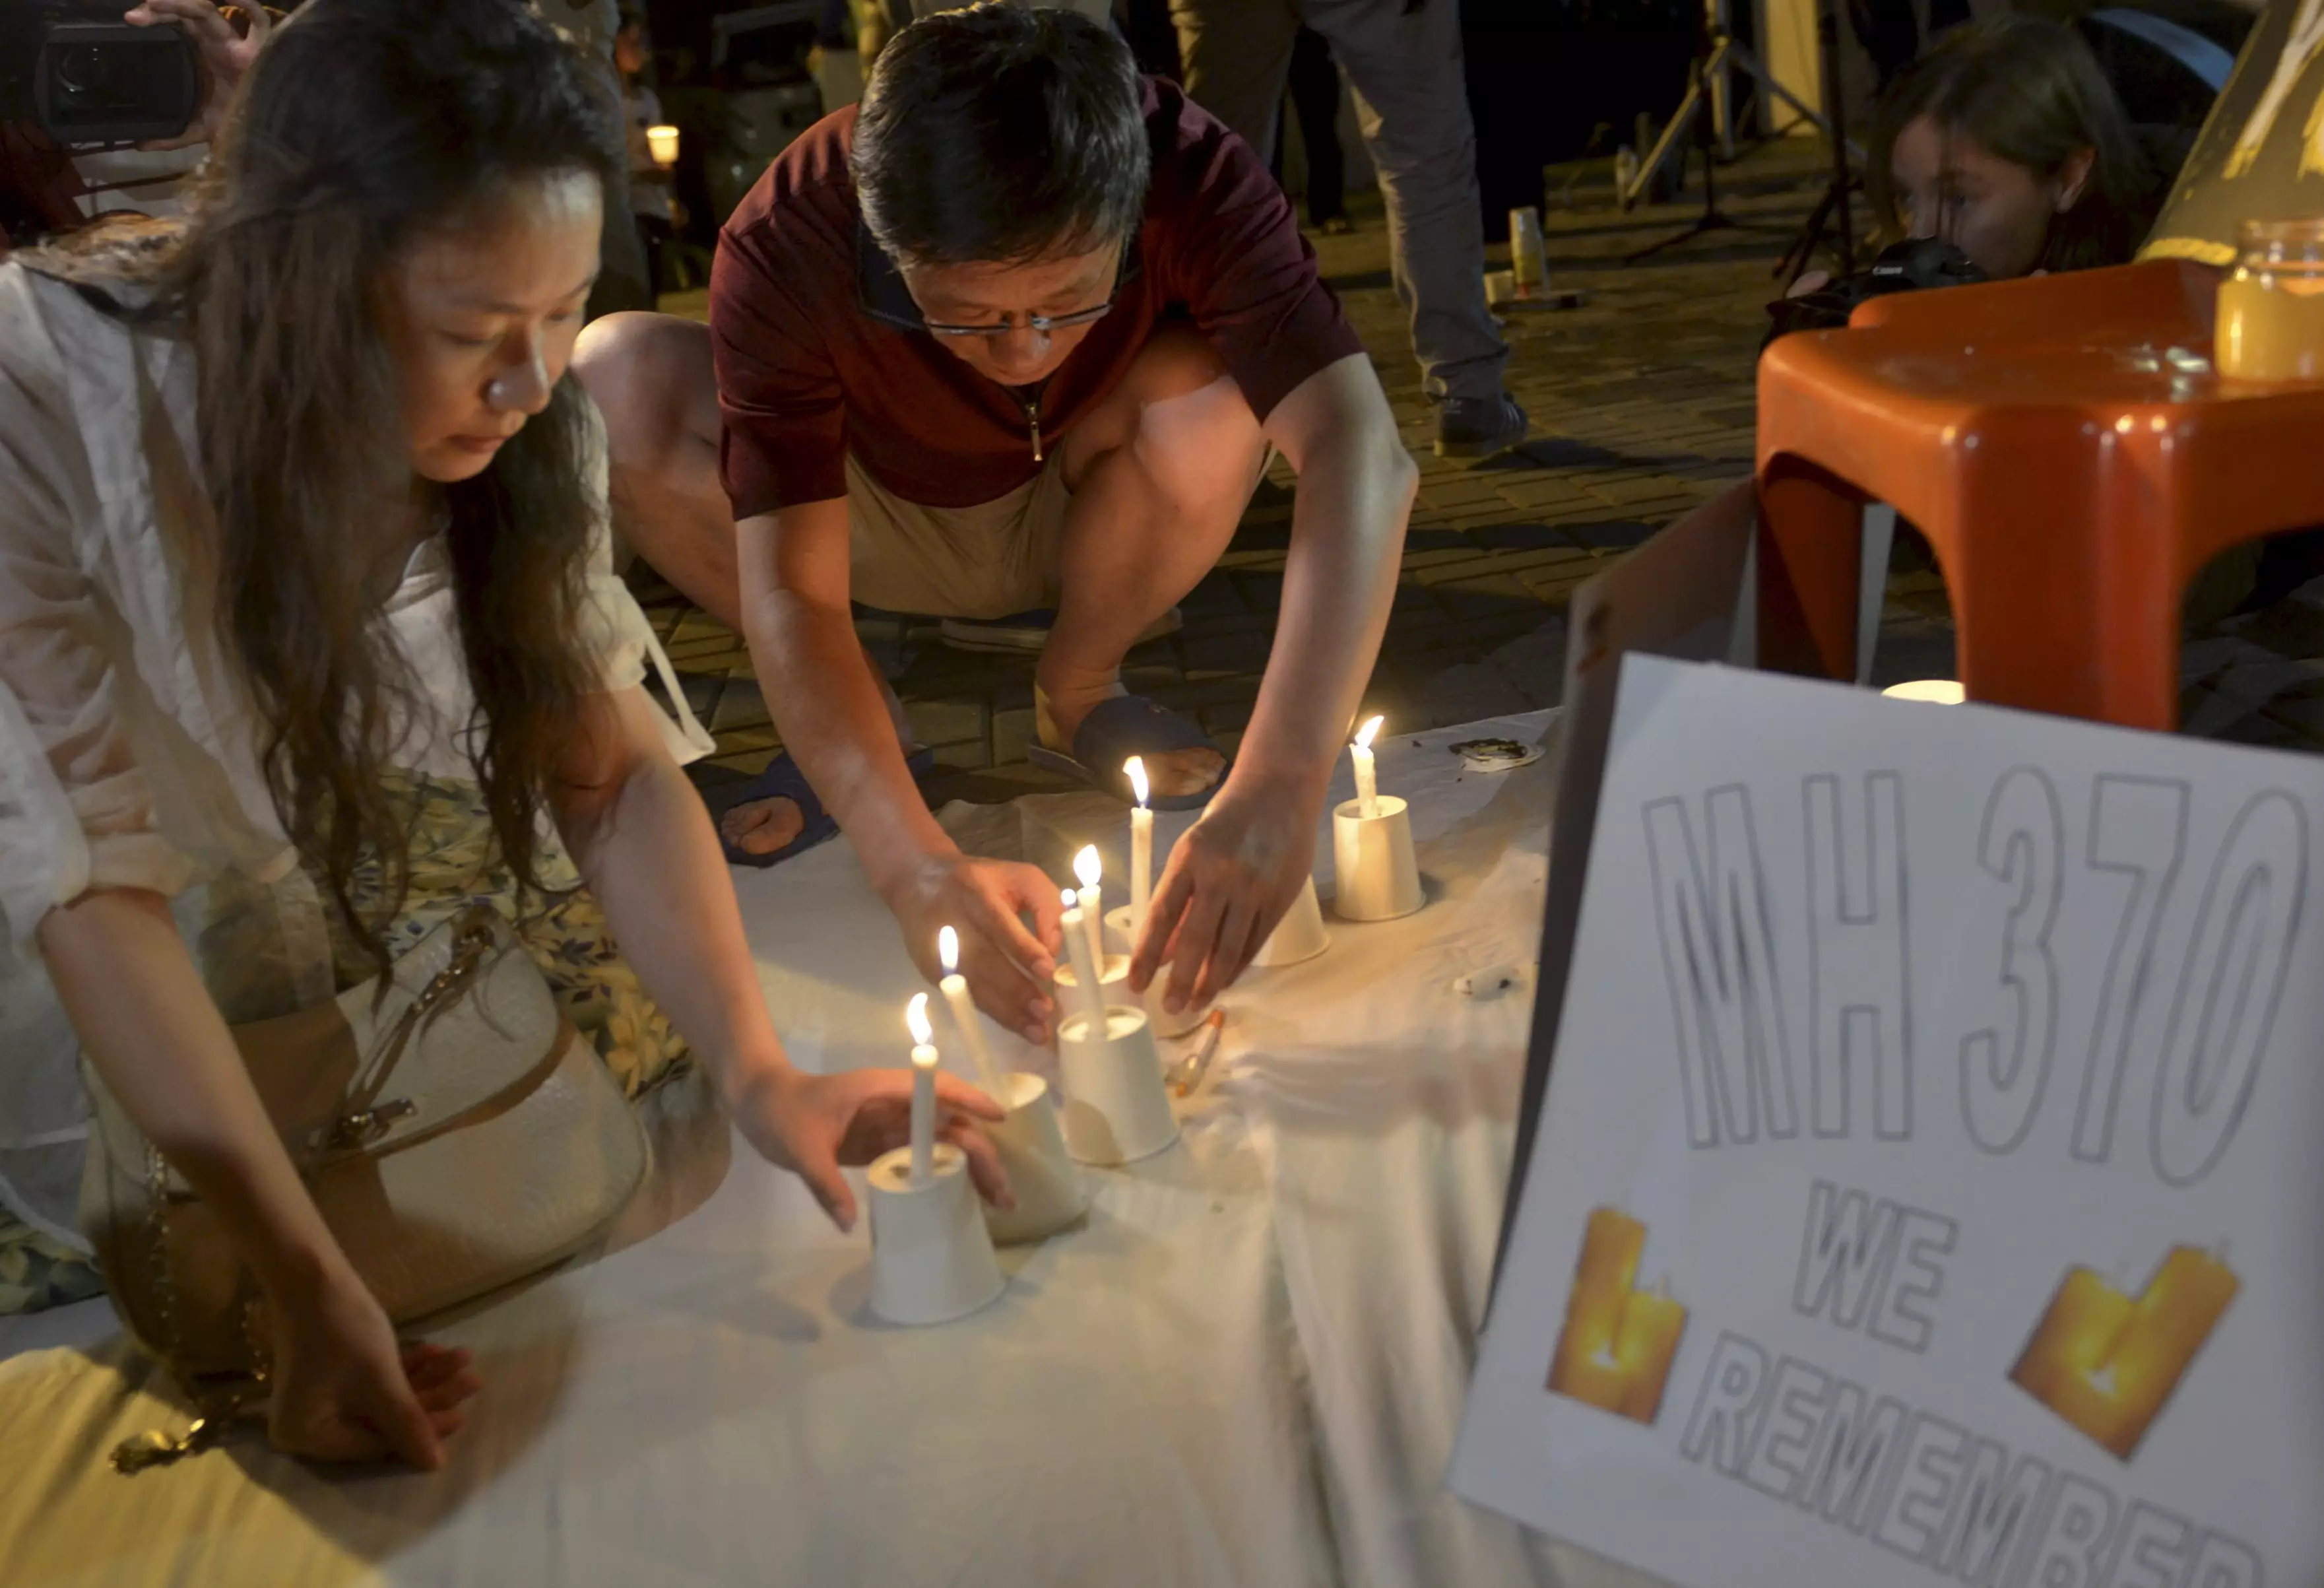 Kelly Wen (L), wife of a Chinese passenger Li who was on board MH370 light up a candle during vigil.